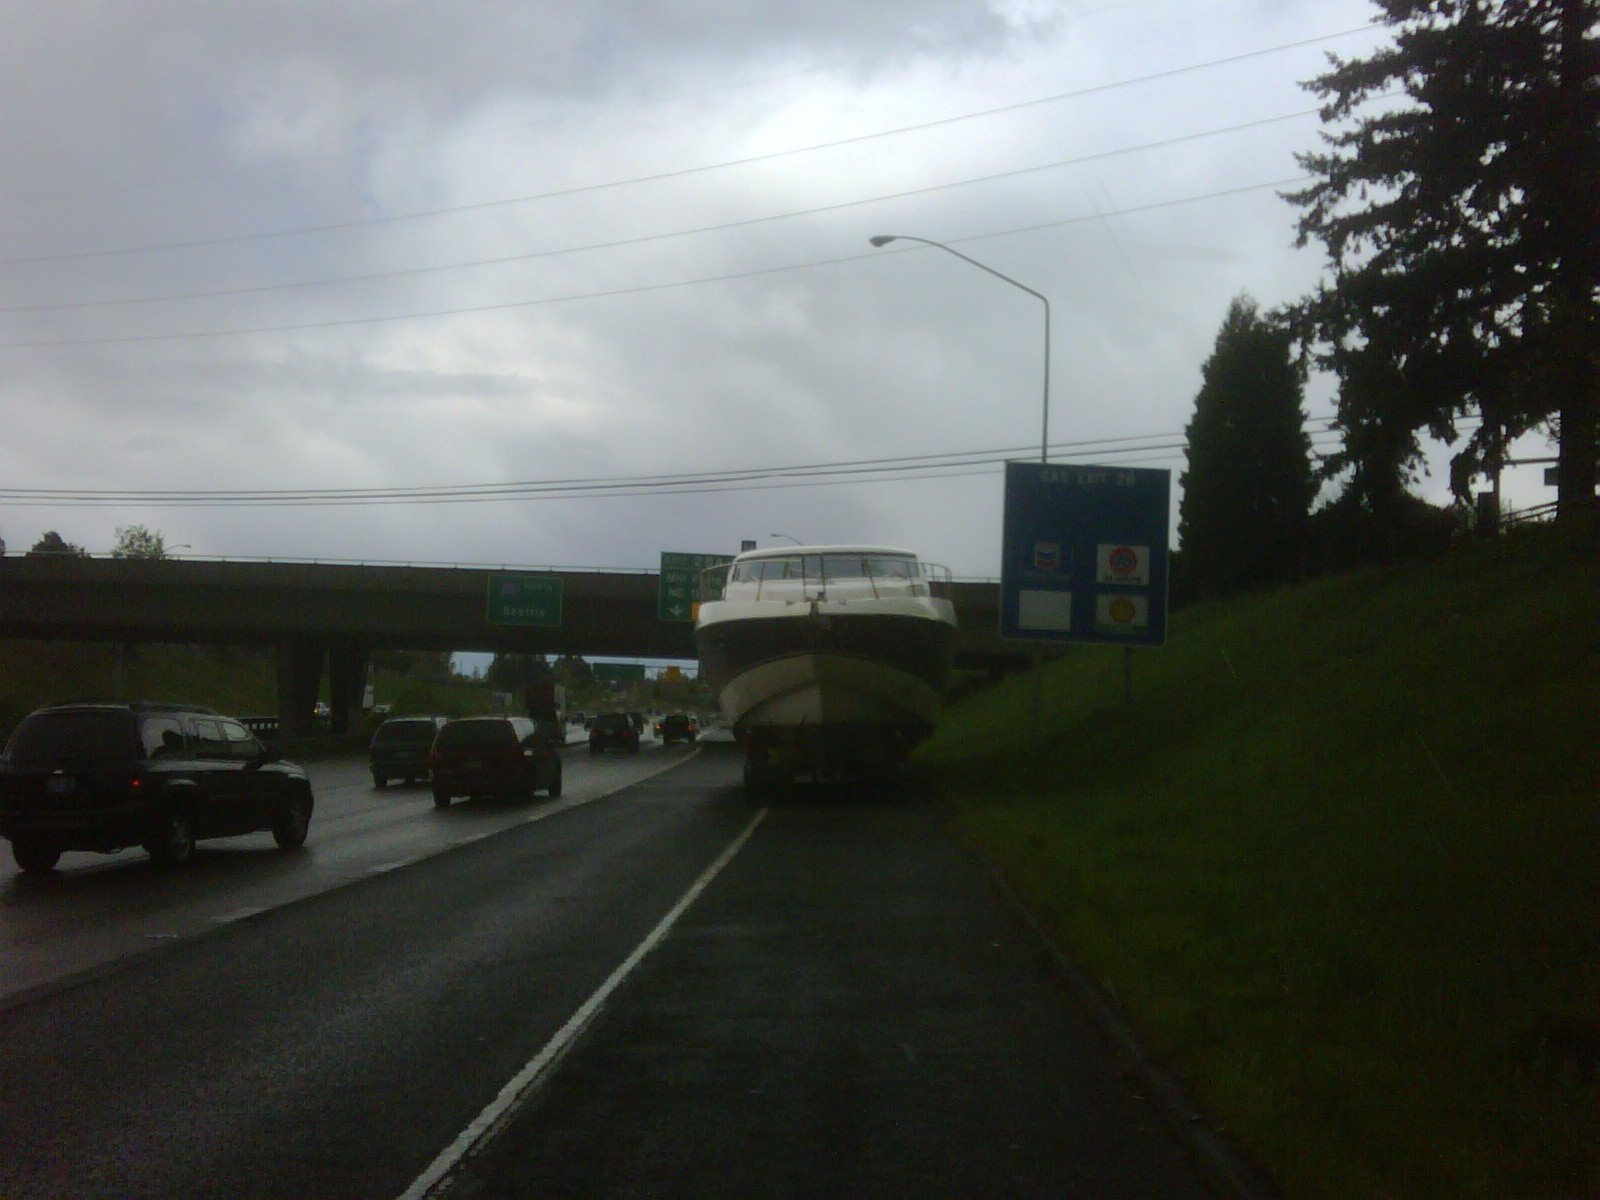 An oversized yacht blocked the exit off S.E. Mill Plain Thursday afternoon, Washington State Patrol said.